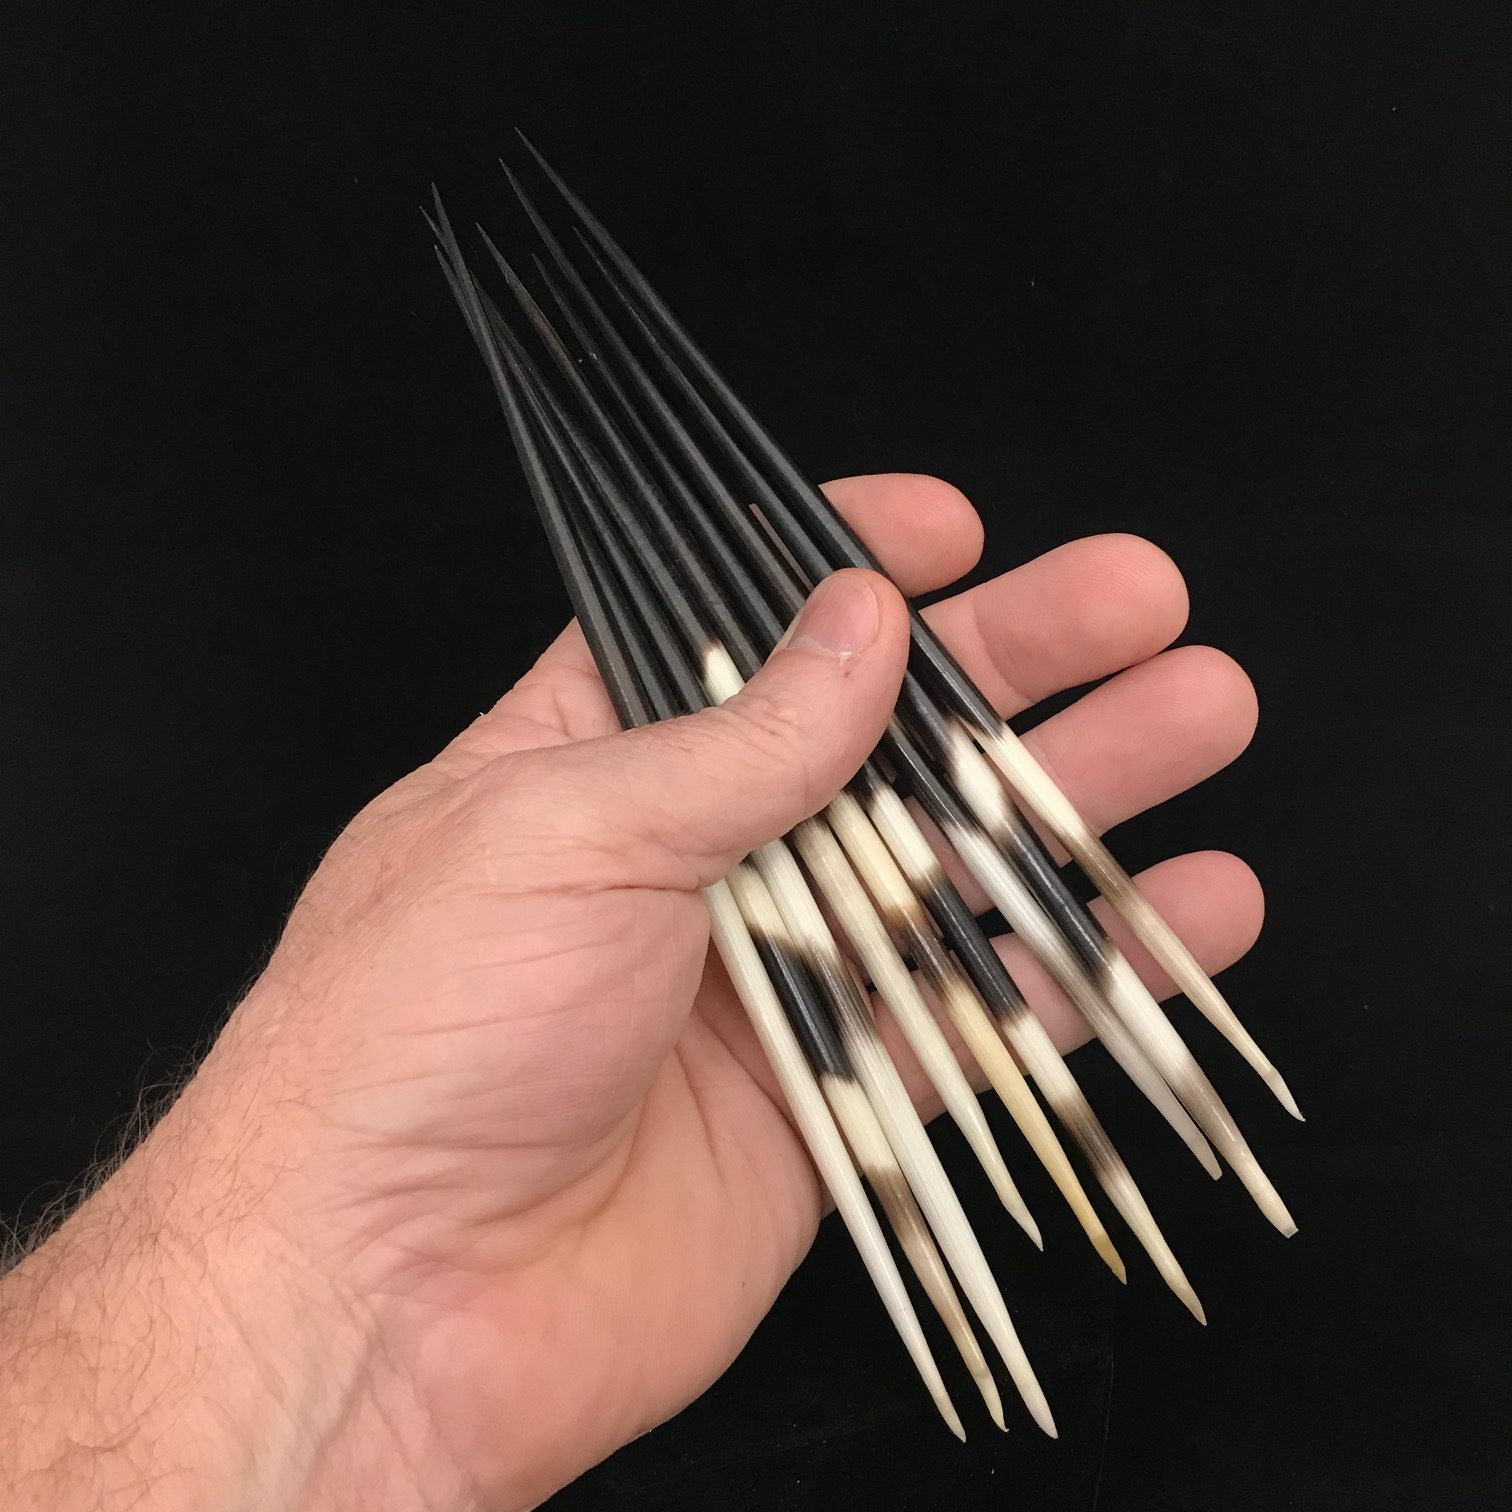 Porcupine Quill 46 African Porcupine Quills Needles Spines Craft